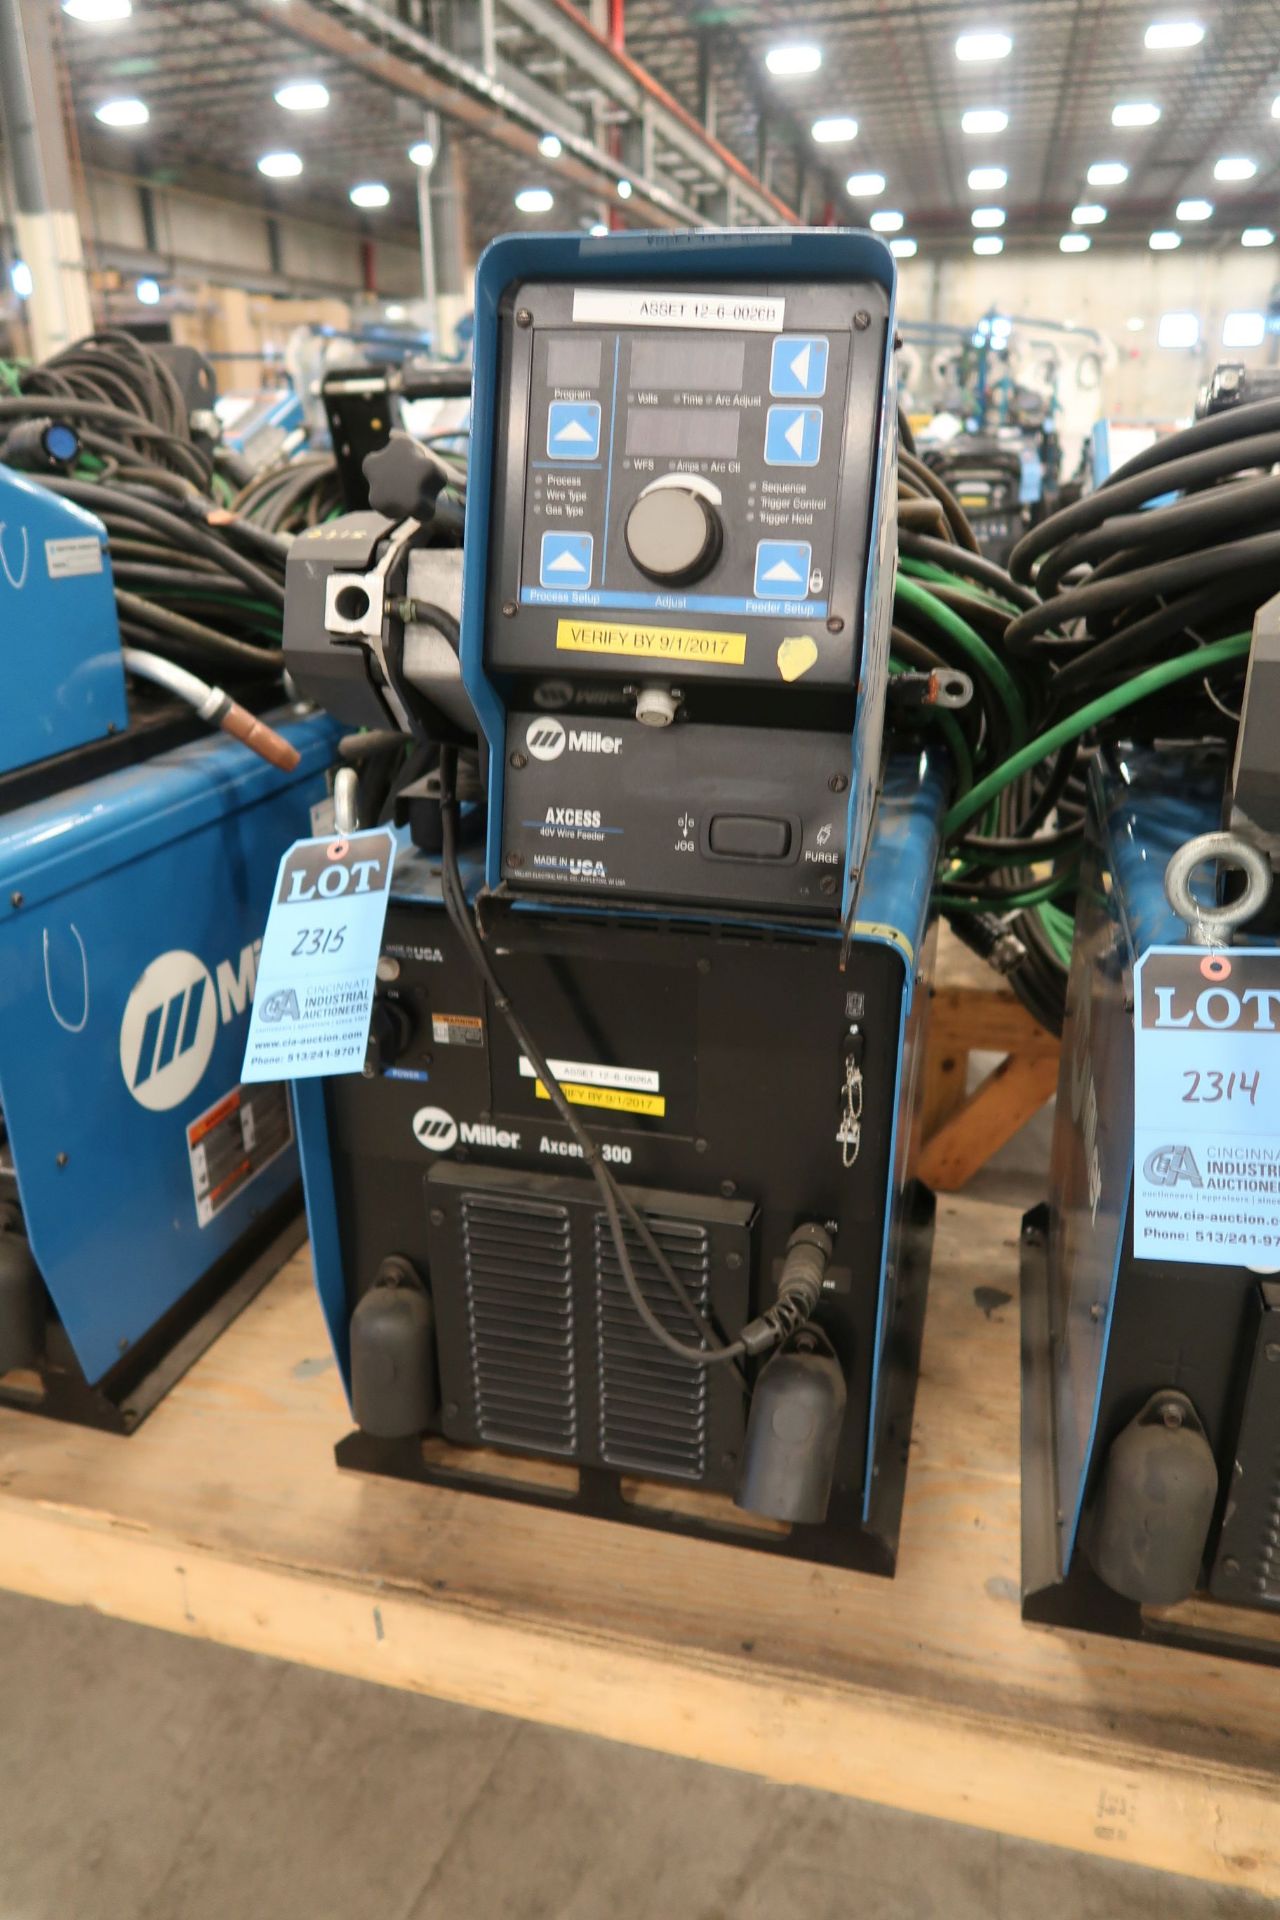 300 AMP MILLER AXCESS 300 MIG WELDER WITH MILLER AXCESS 40V WIRE FEEDER; FA 40003-21